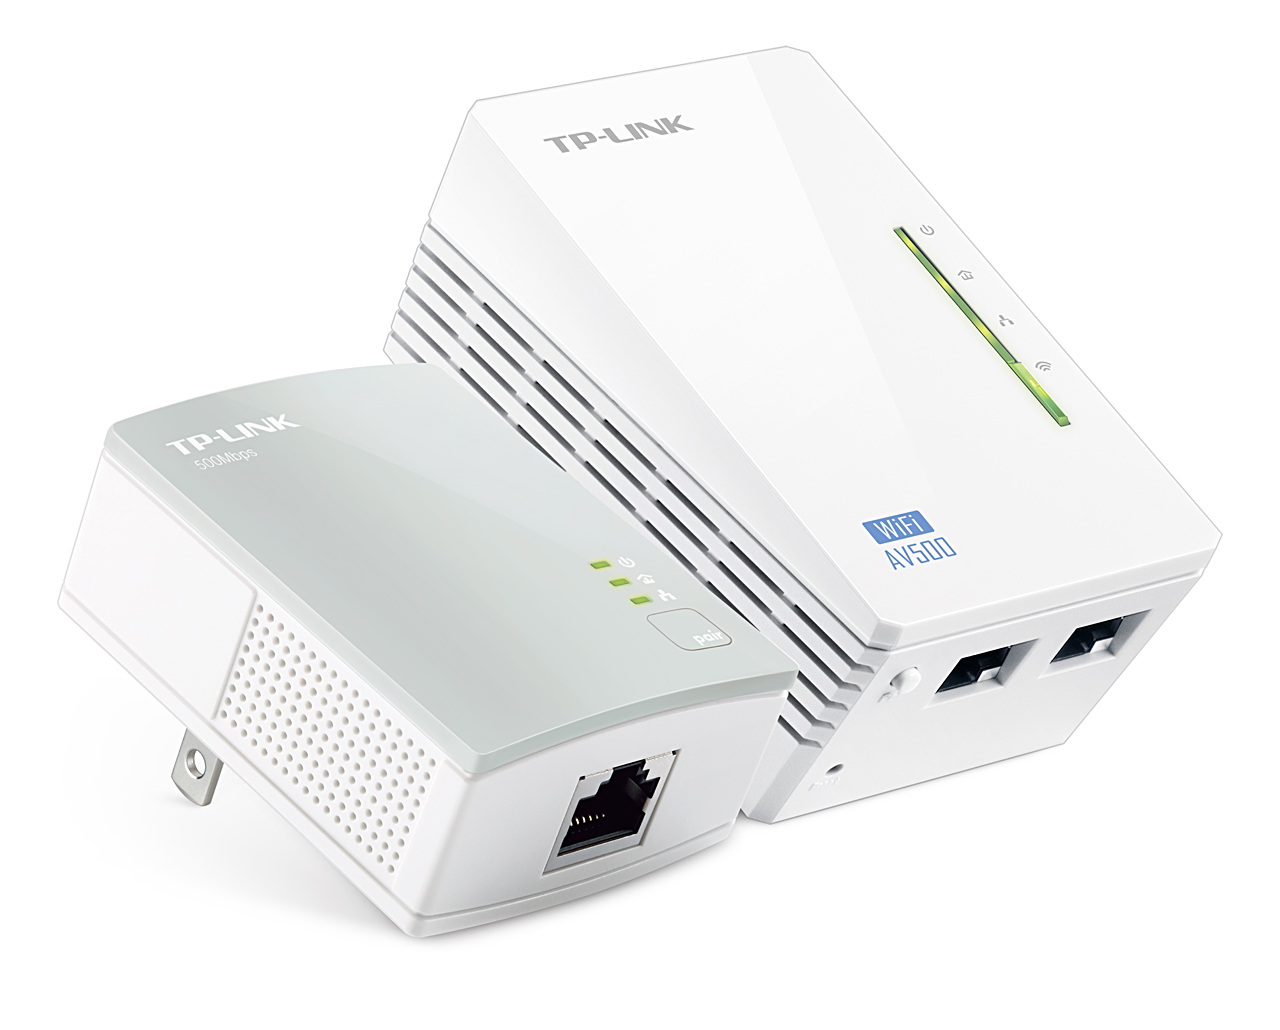 advies laat staan maagd TP-Link TL-WPA4220KIT Powerline Wireless Extender Review | The ChannelPro  Network